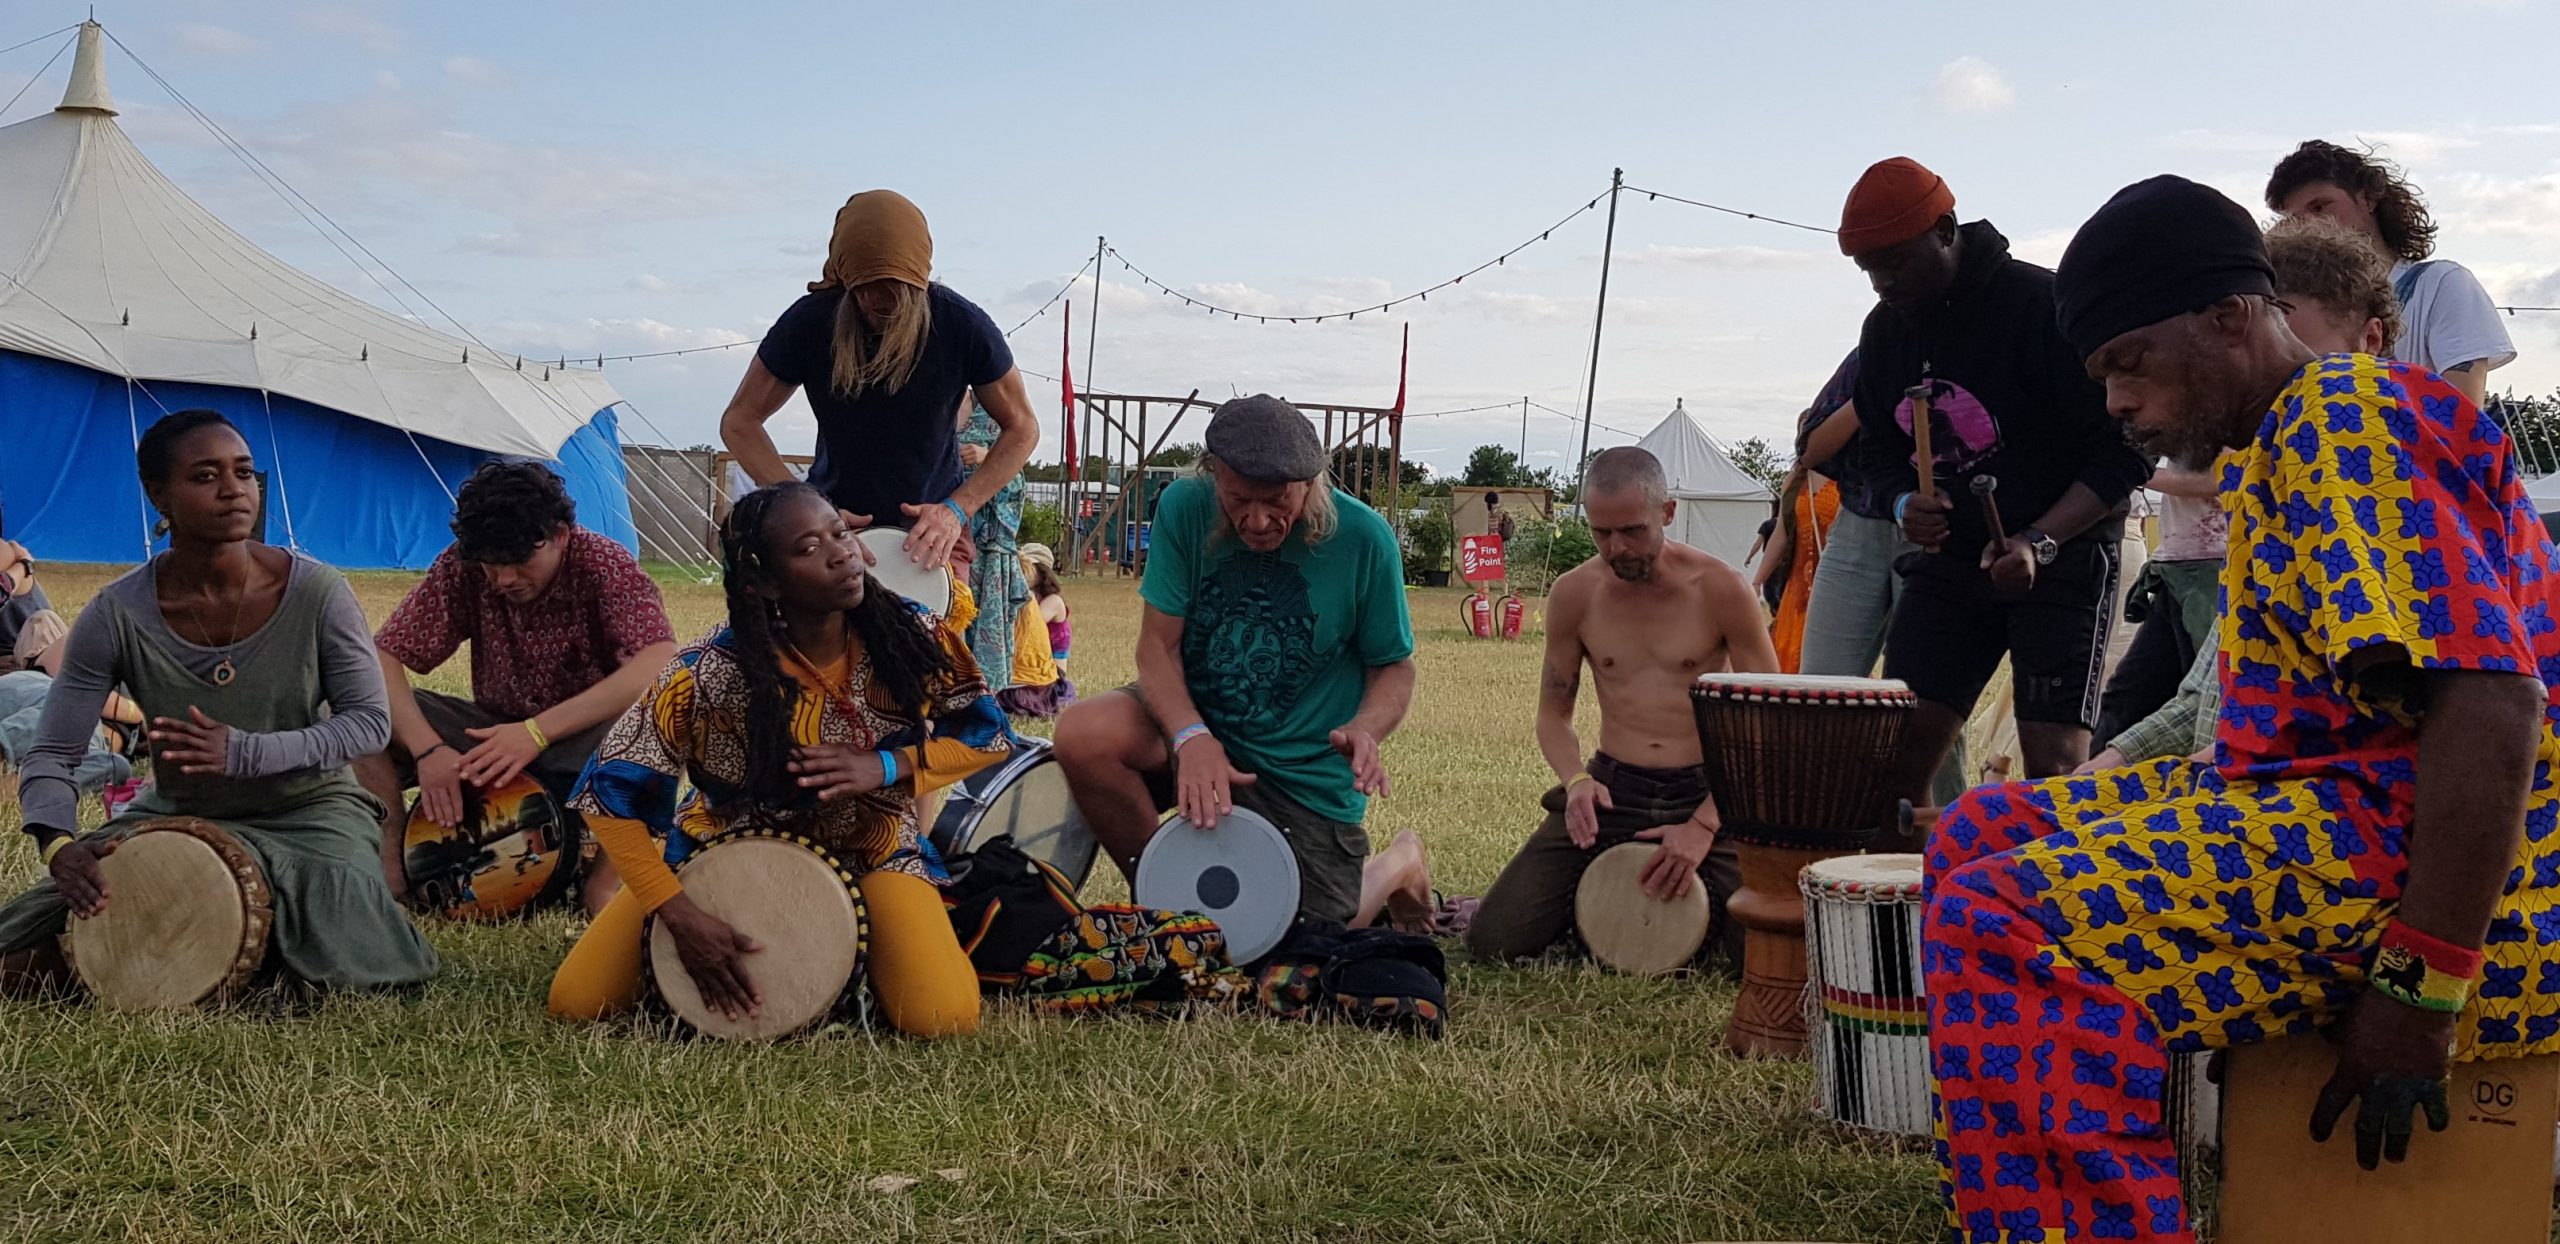 A group of pepole sitting in the grass in the evening light, playing a variety of drums. Behind them are the tents and bunting of the fair's main field. 